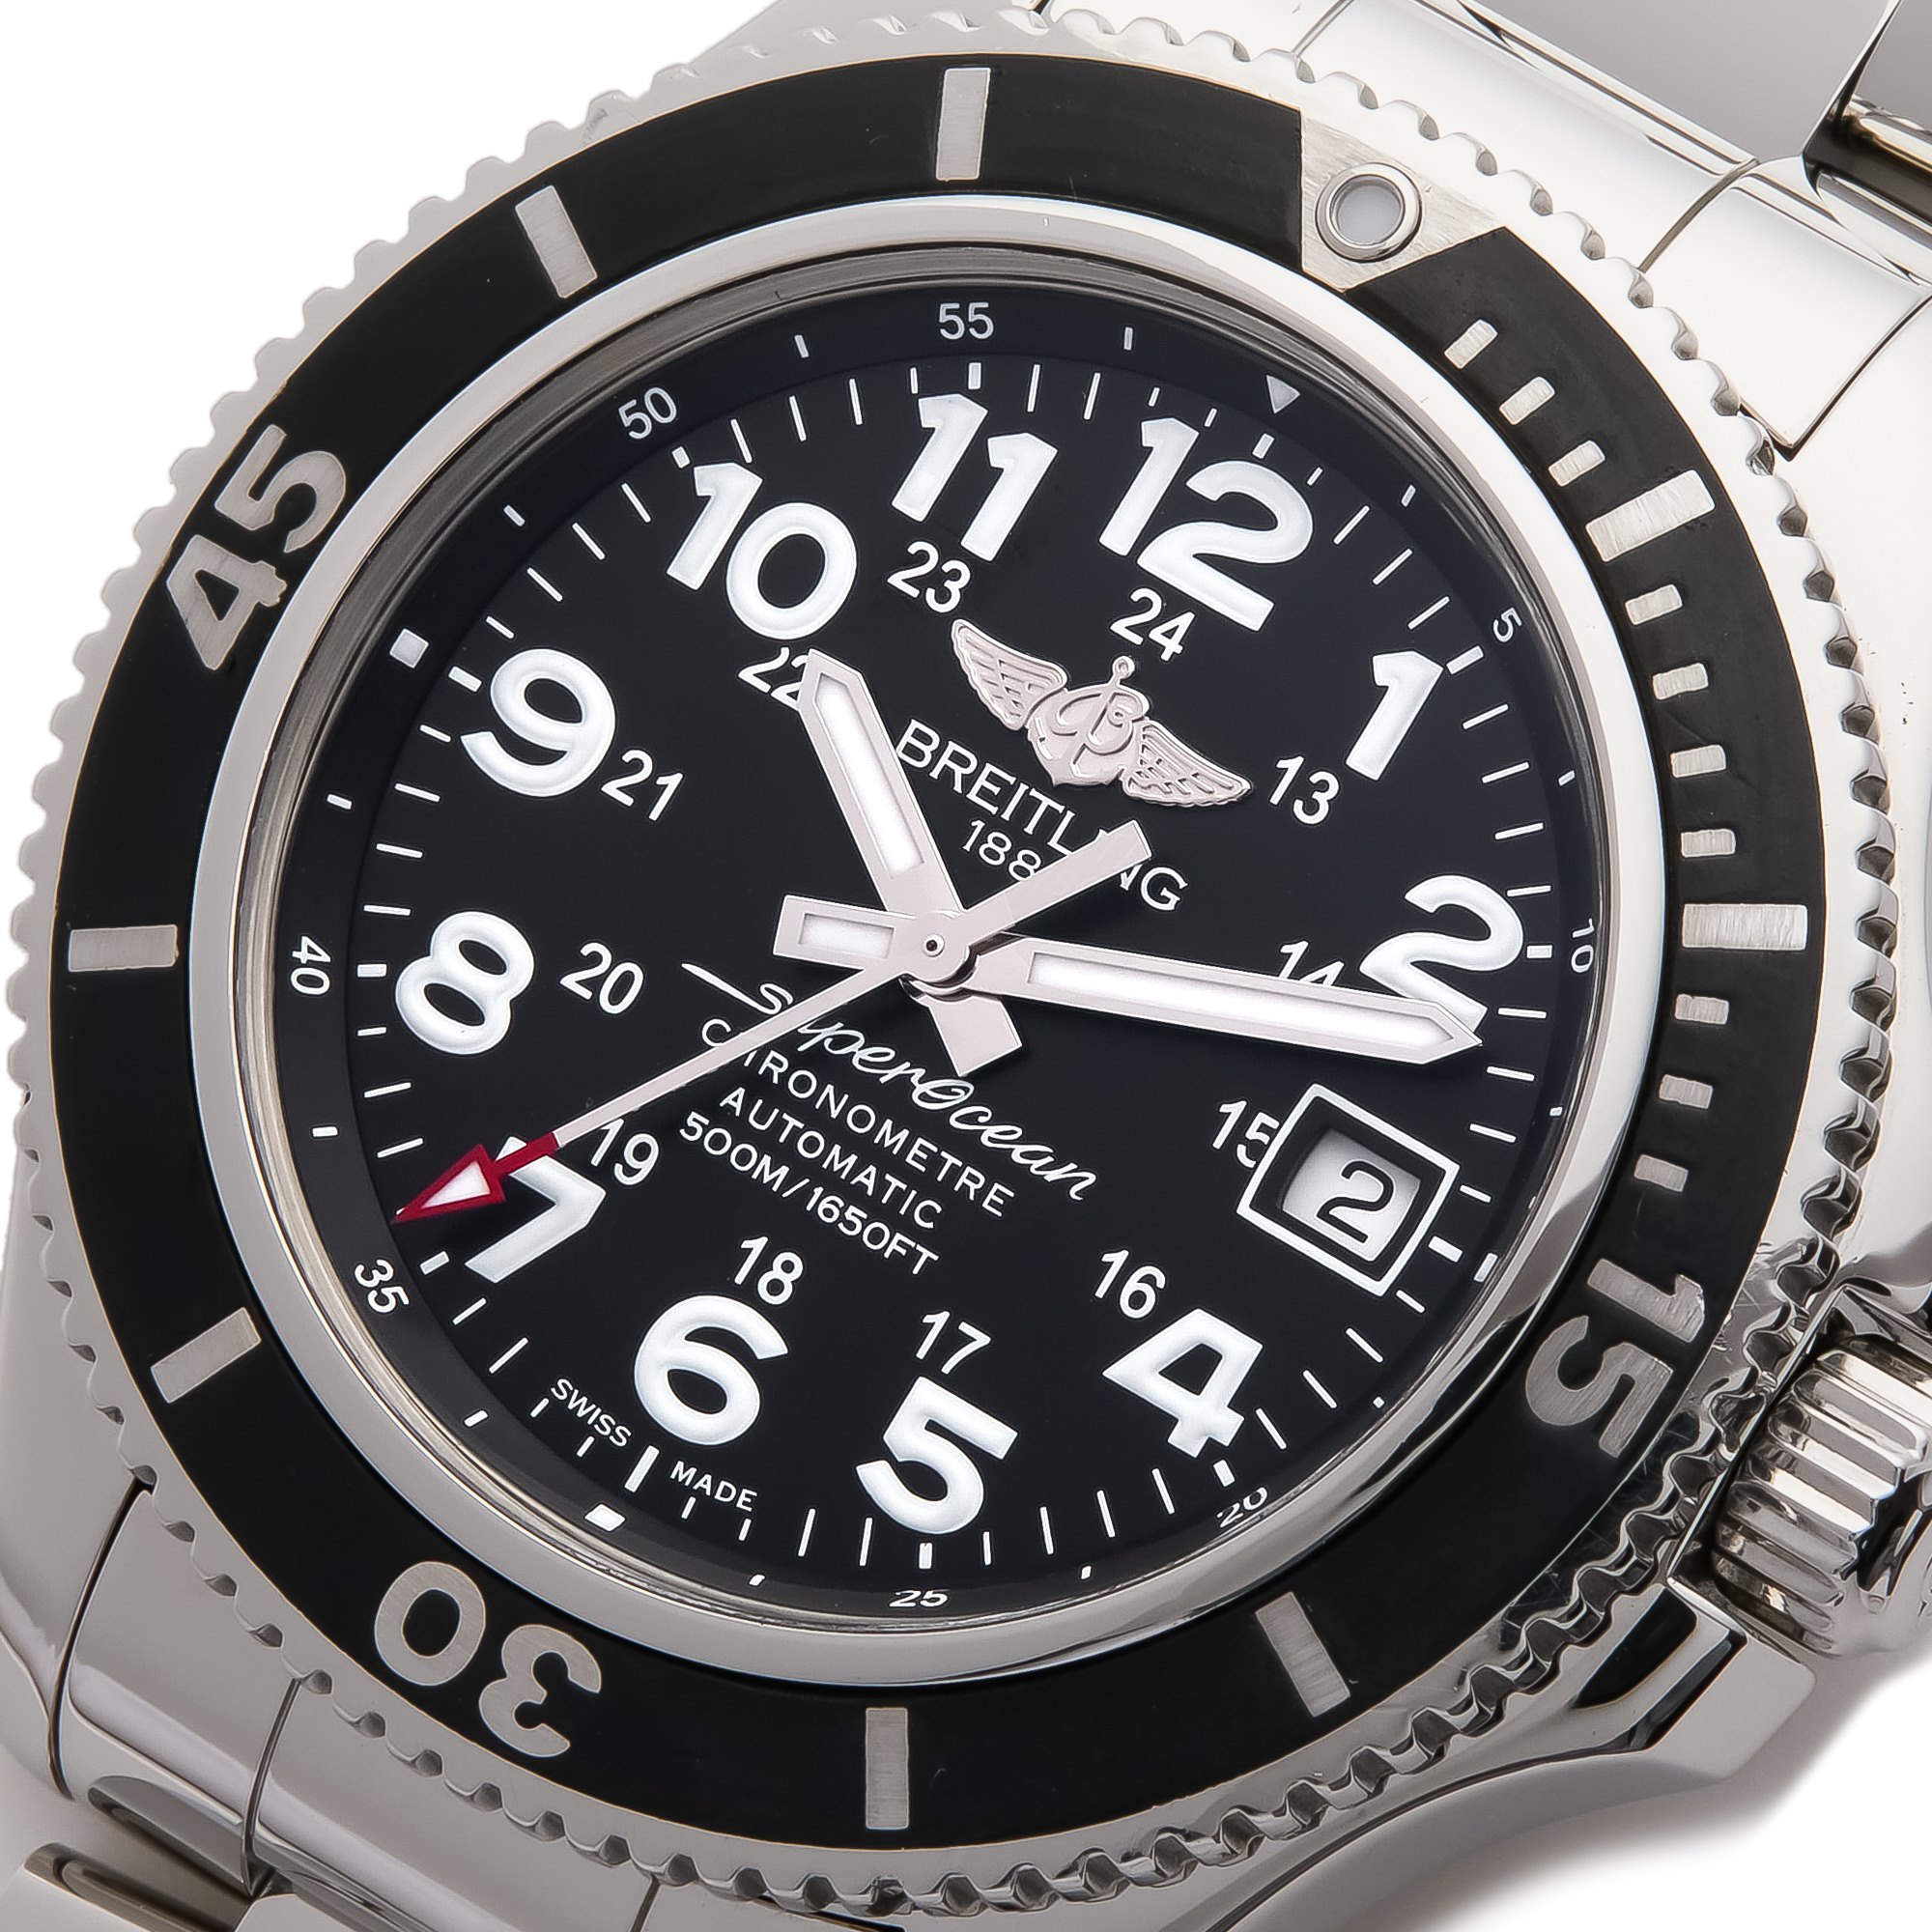 Breitling Superocean II 42 Stainless Steel A17365C9/BD67-161A